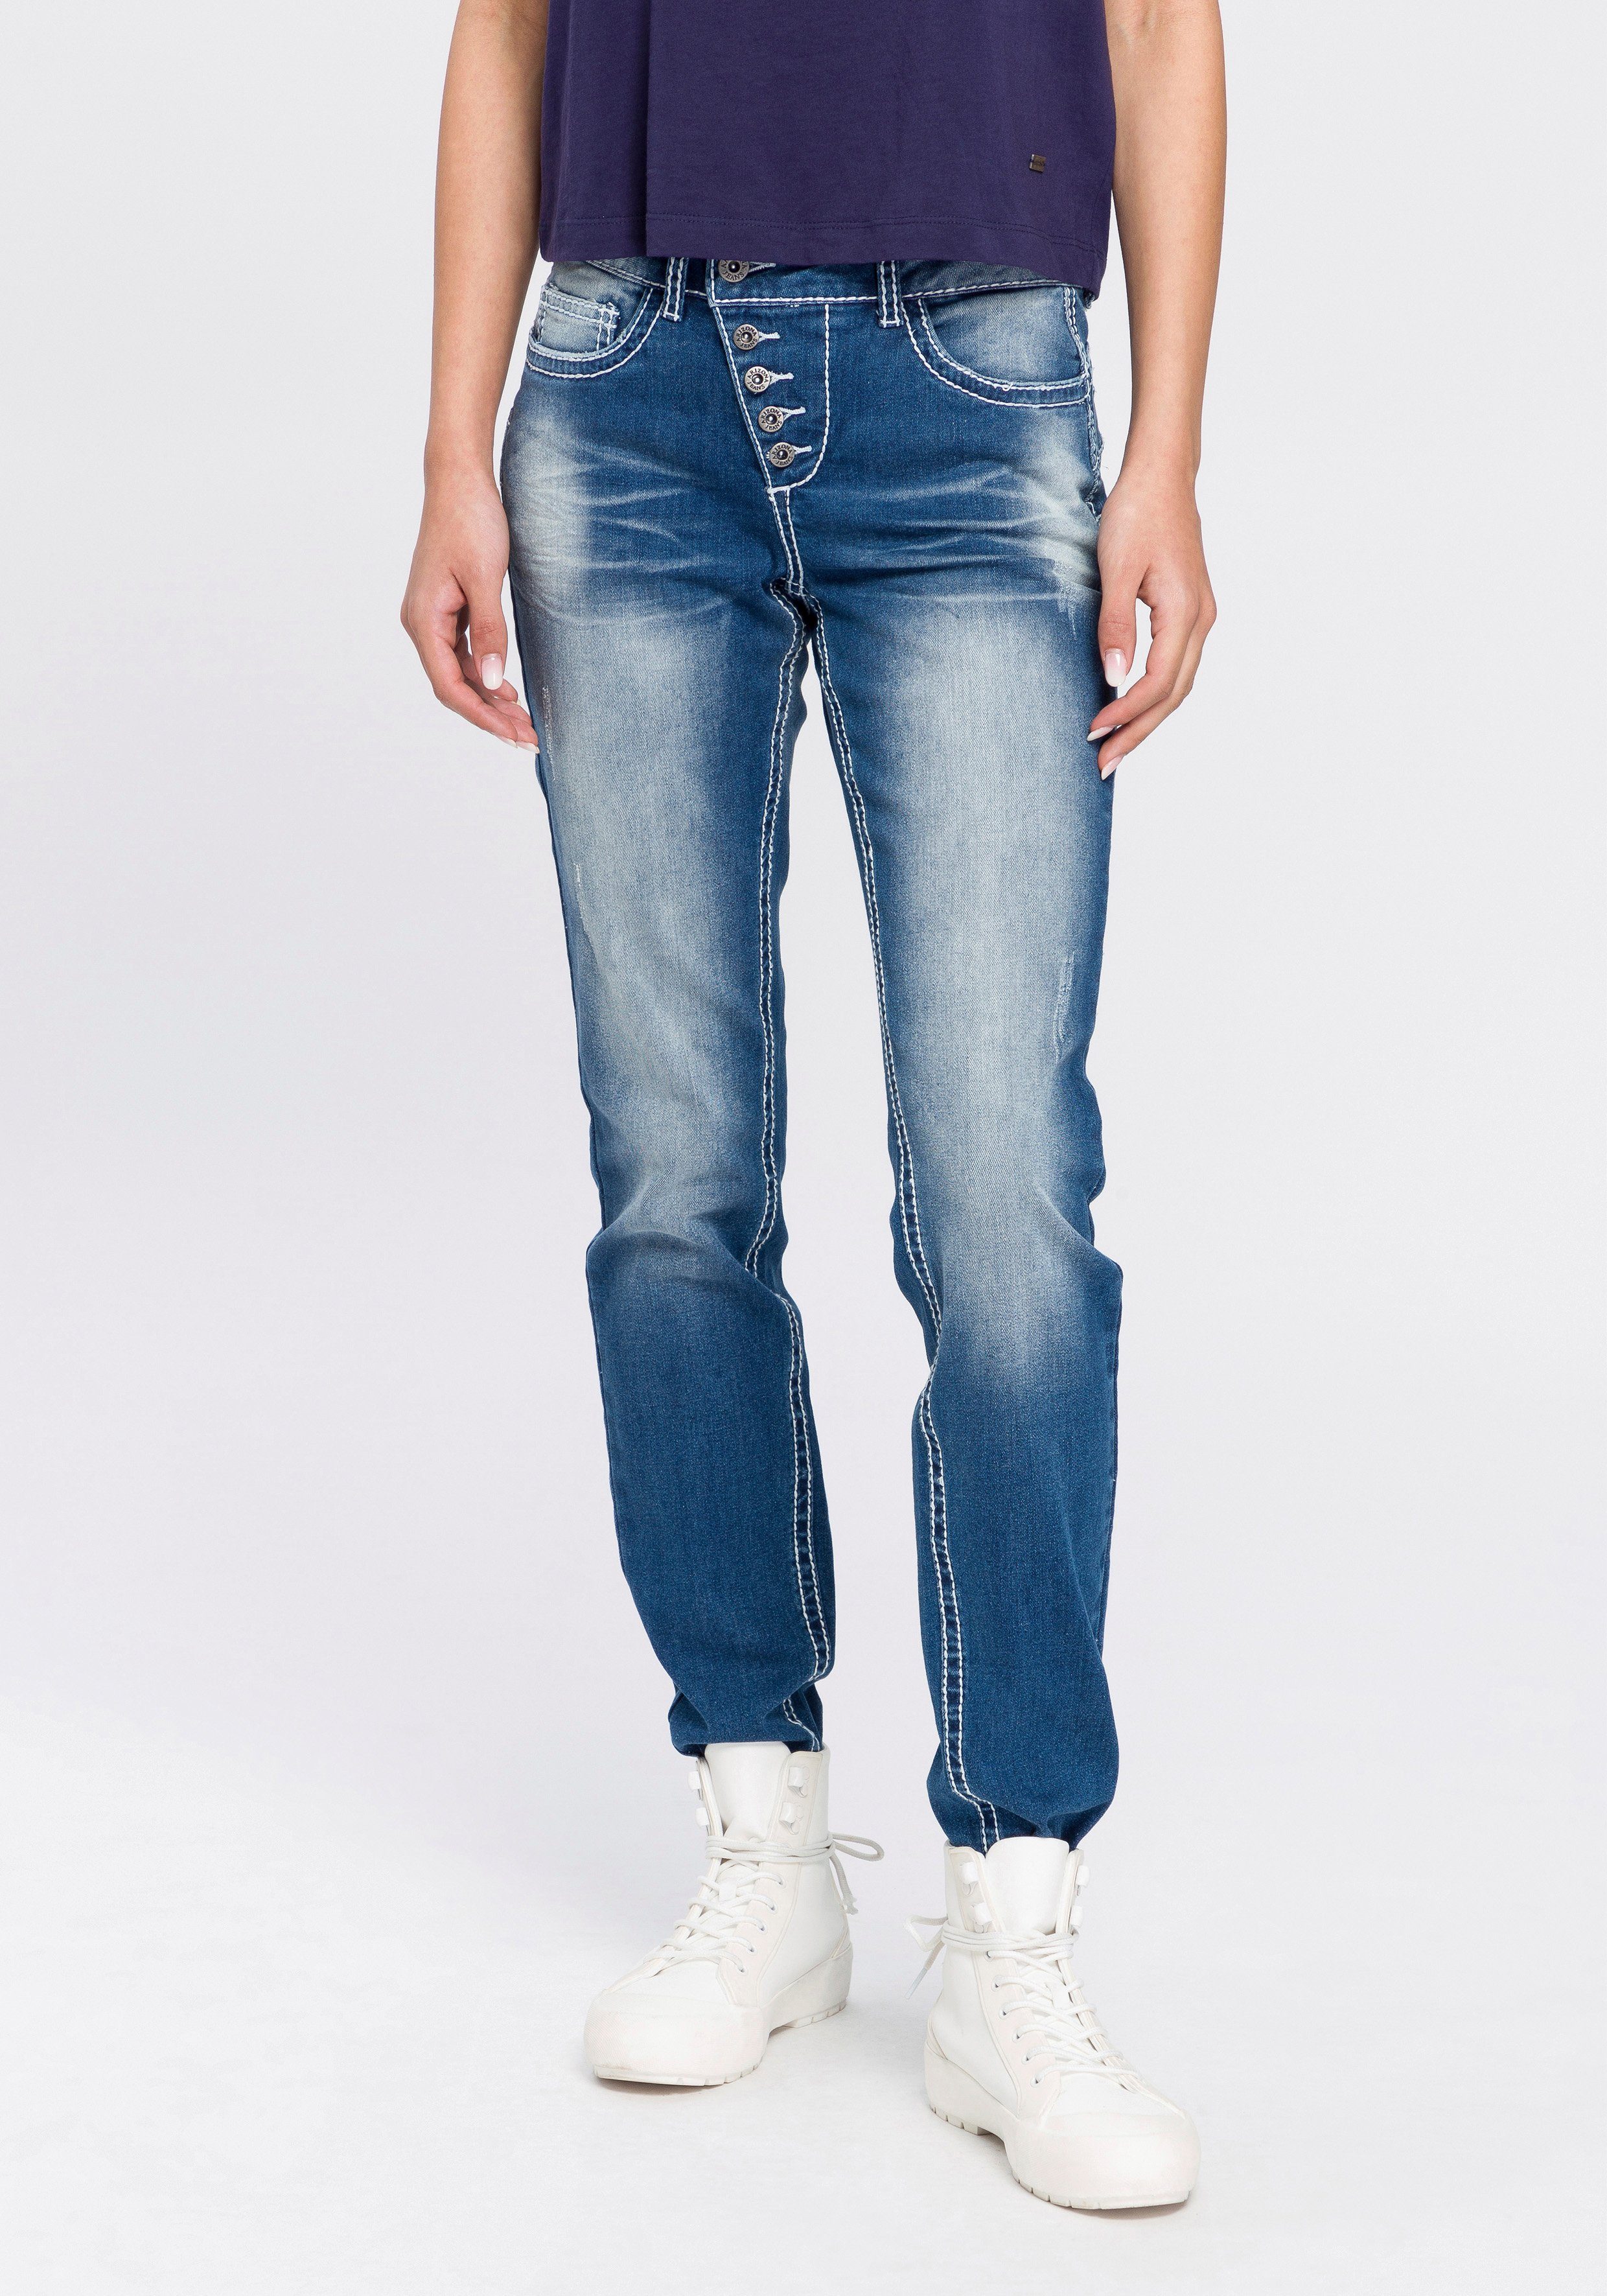 Arizona Slim fit jeans - Mid kopen | waist OTTO Shaping Washed online Heavy